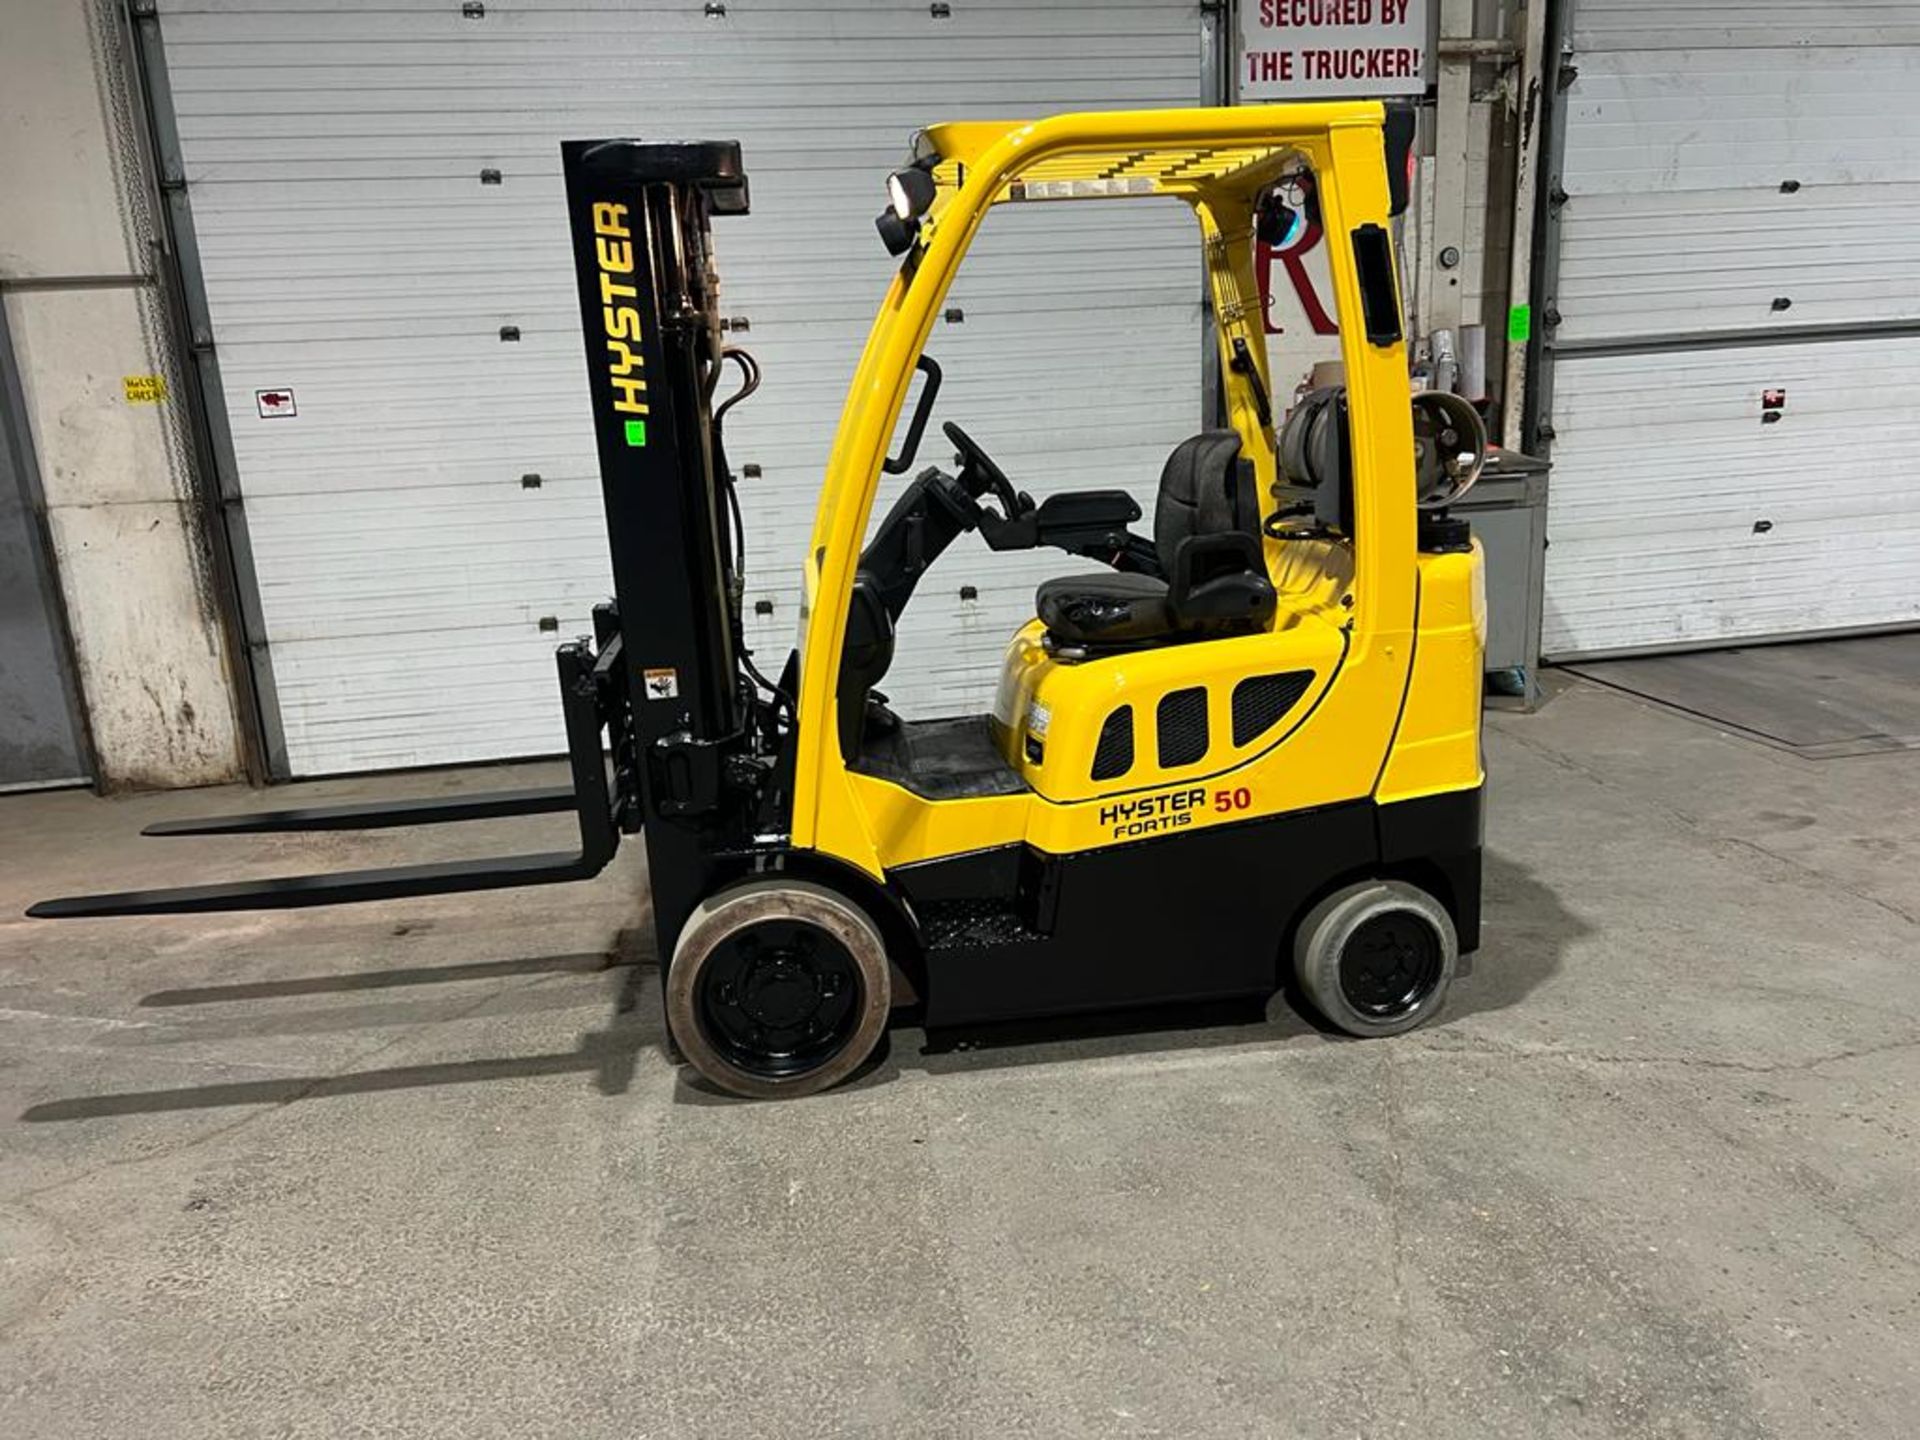 Hyster 50 - 5,000lbs Capacity Forklift LPG (propane) with NEW 48" FORKS with Sideshift & 3-stage